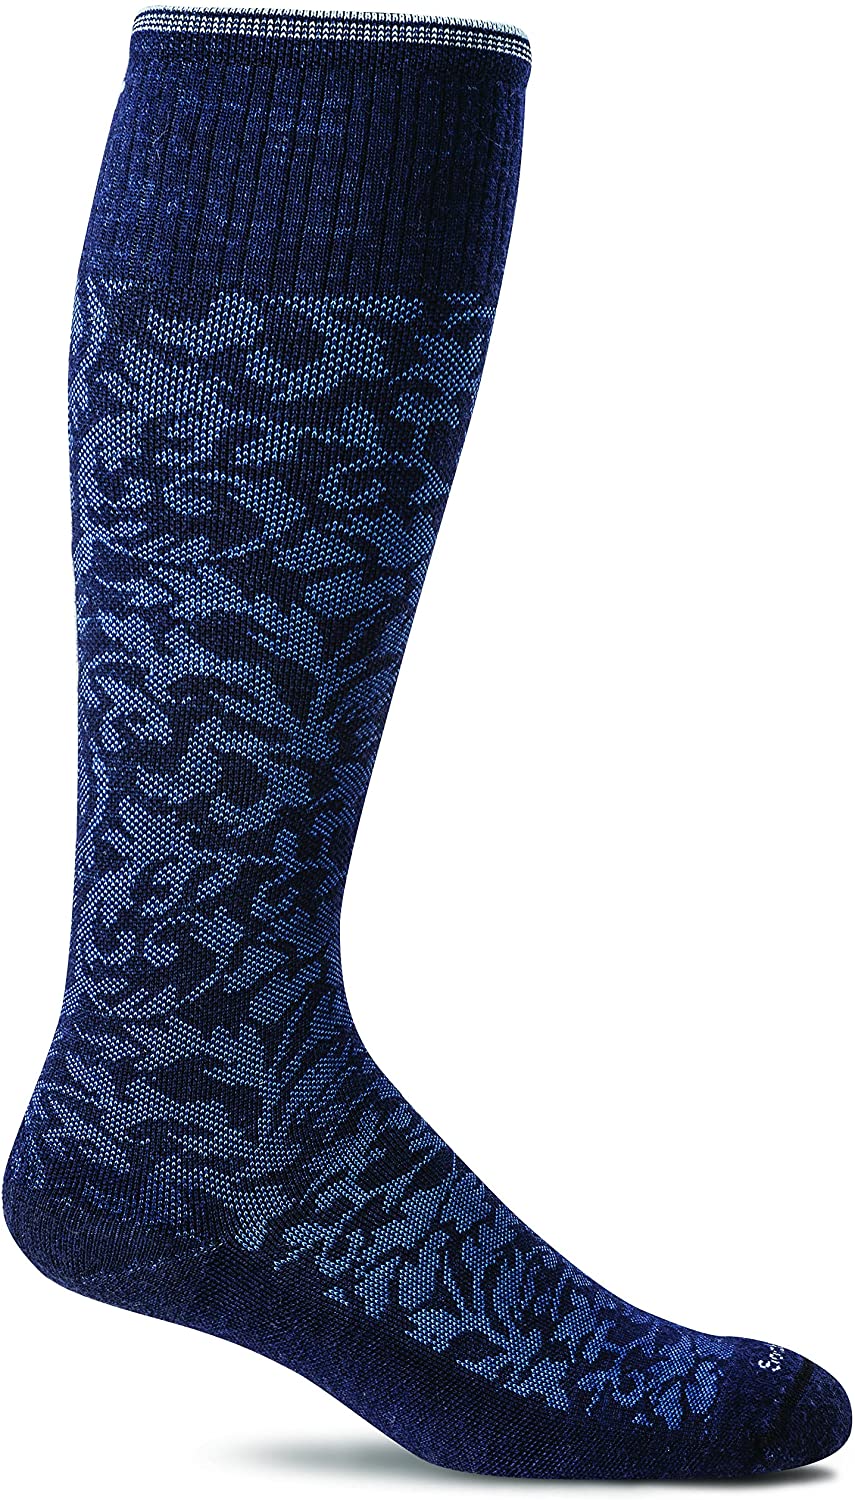 Sockwell Women's Damask Moderate Graduated Compression Sock in Navy from the side